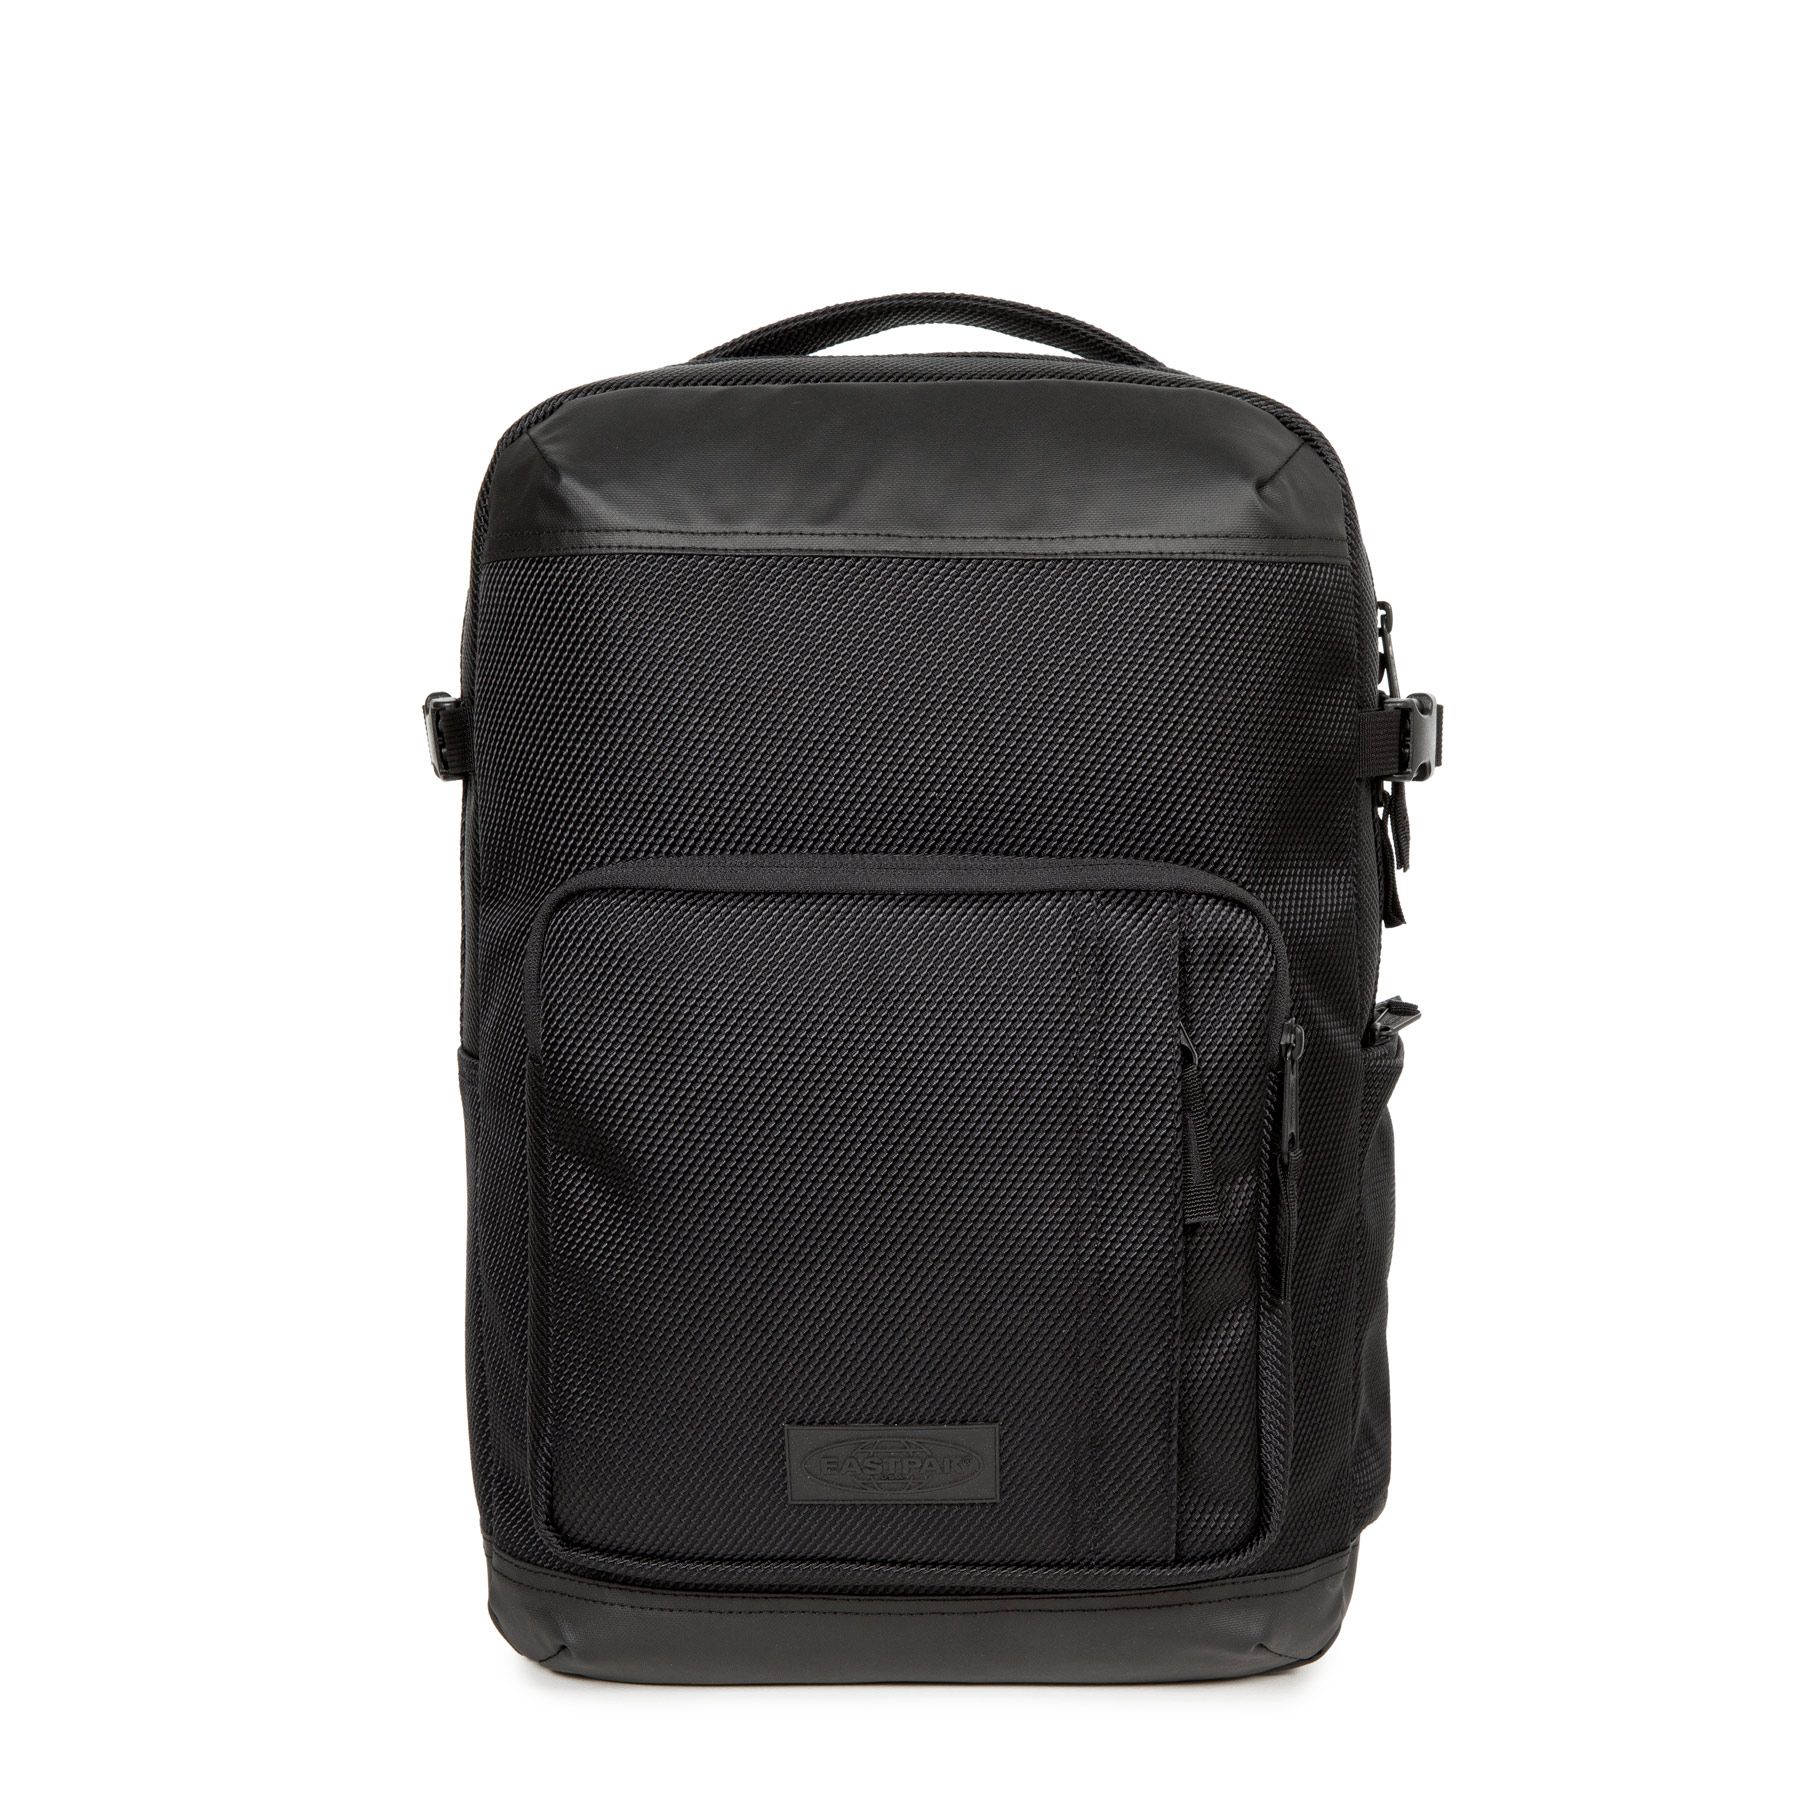 Bruce Herbelin-Earle shows off Eastpak's practical and stylish CNNCT ...